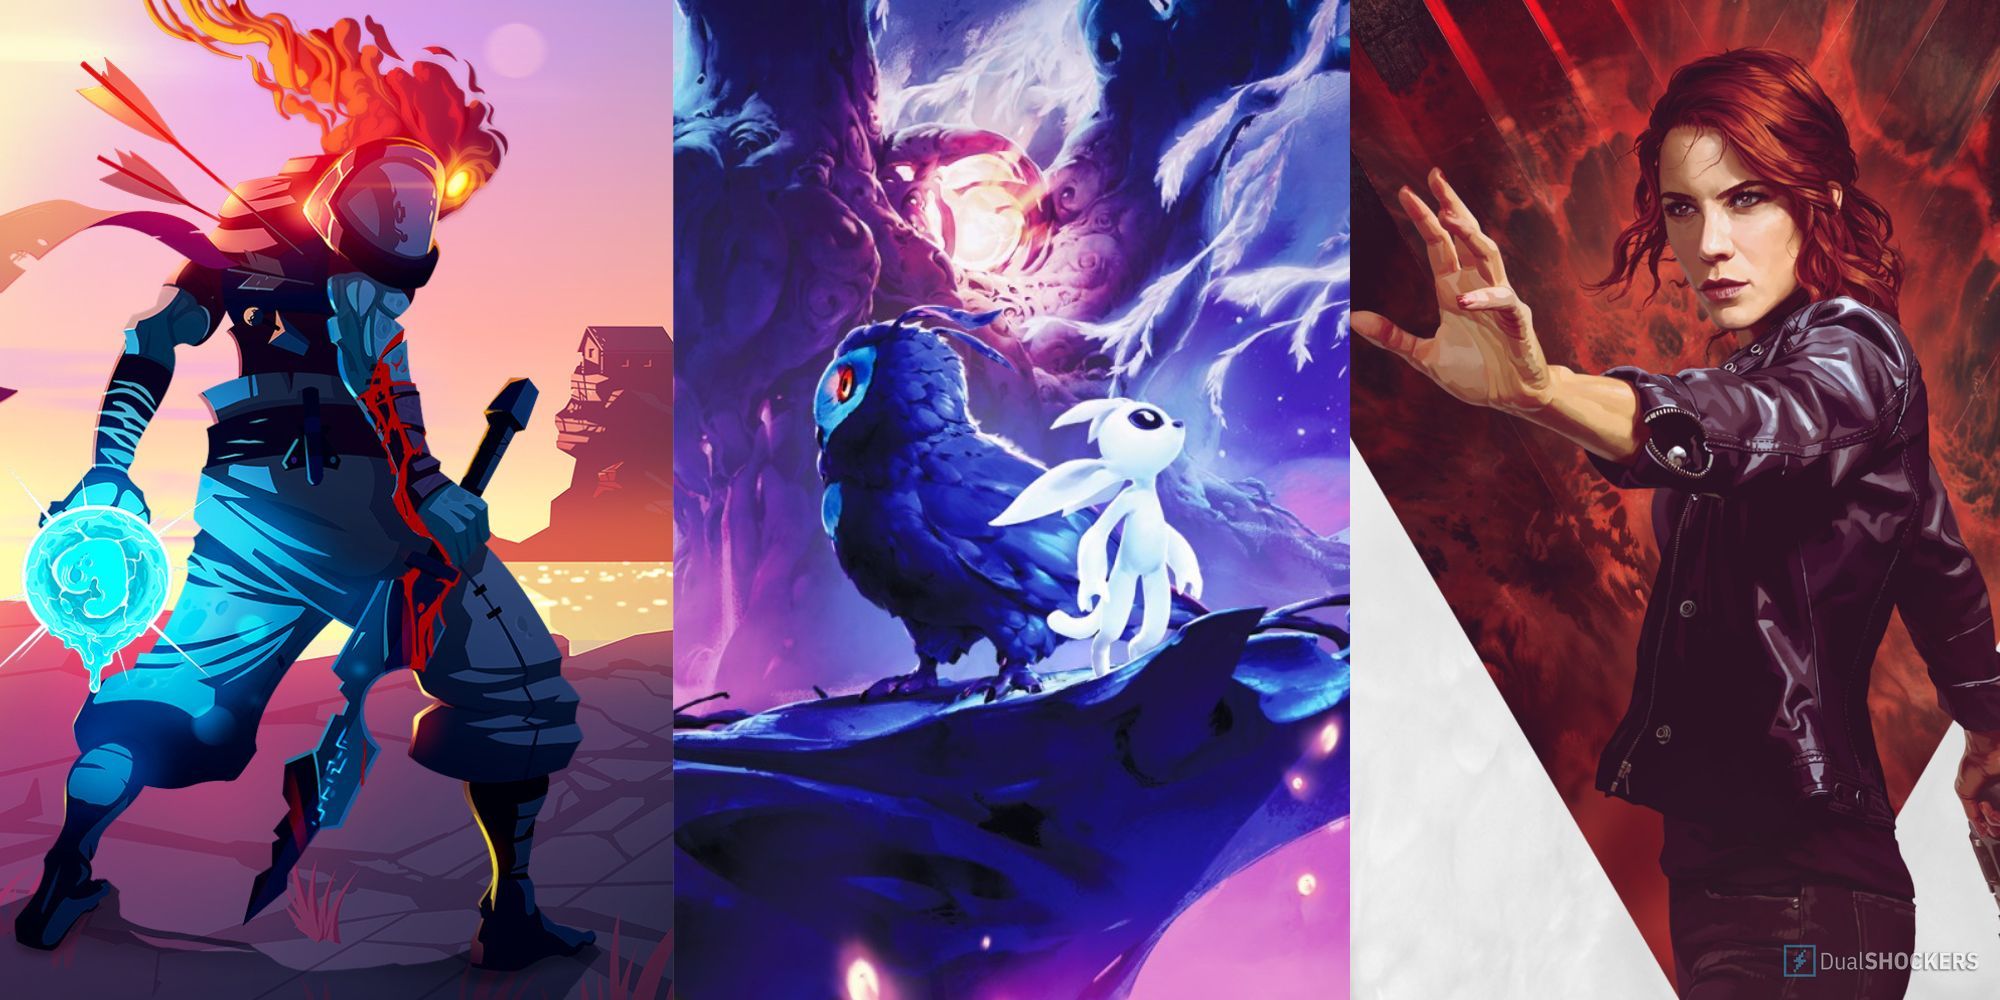 Split feature image with stills from Dead Cells, Ori and the Will of the Wisps, and Control.